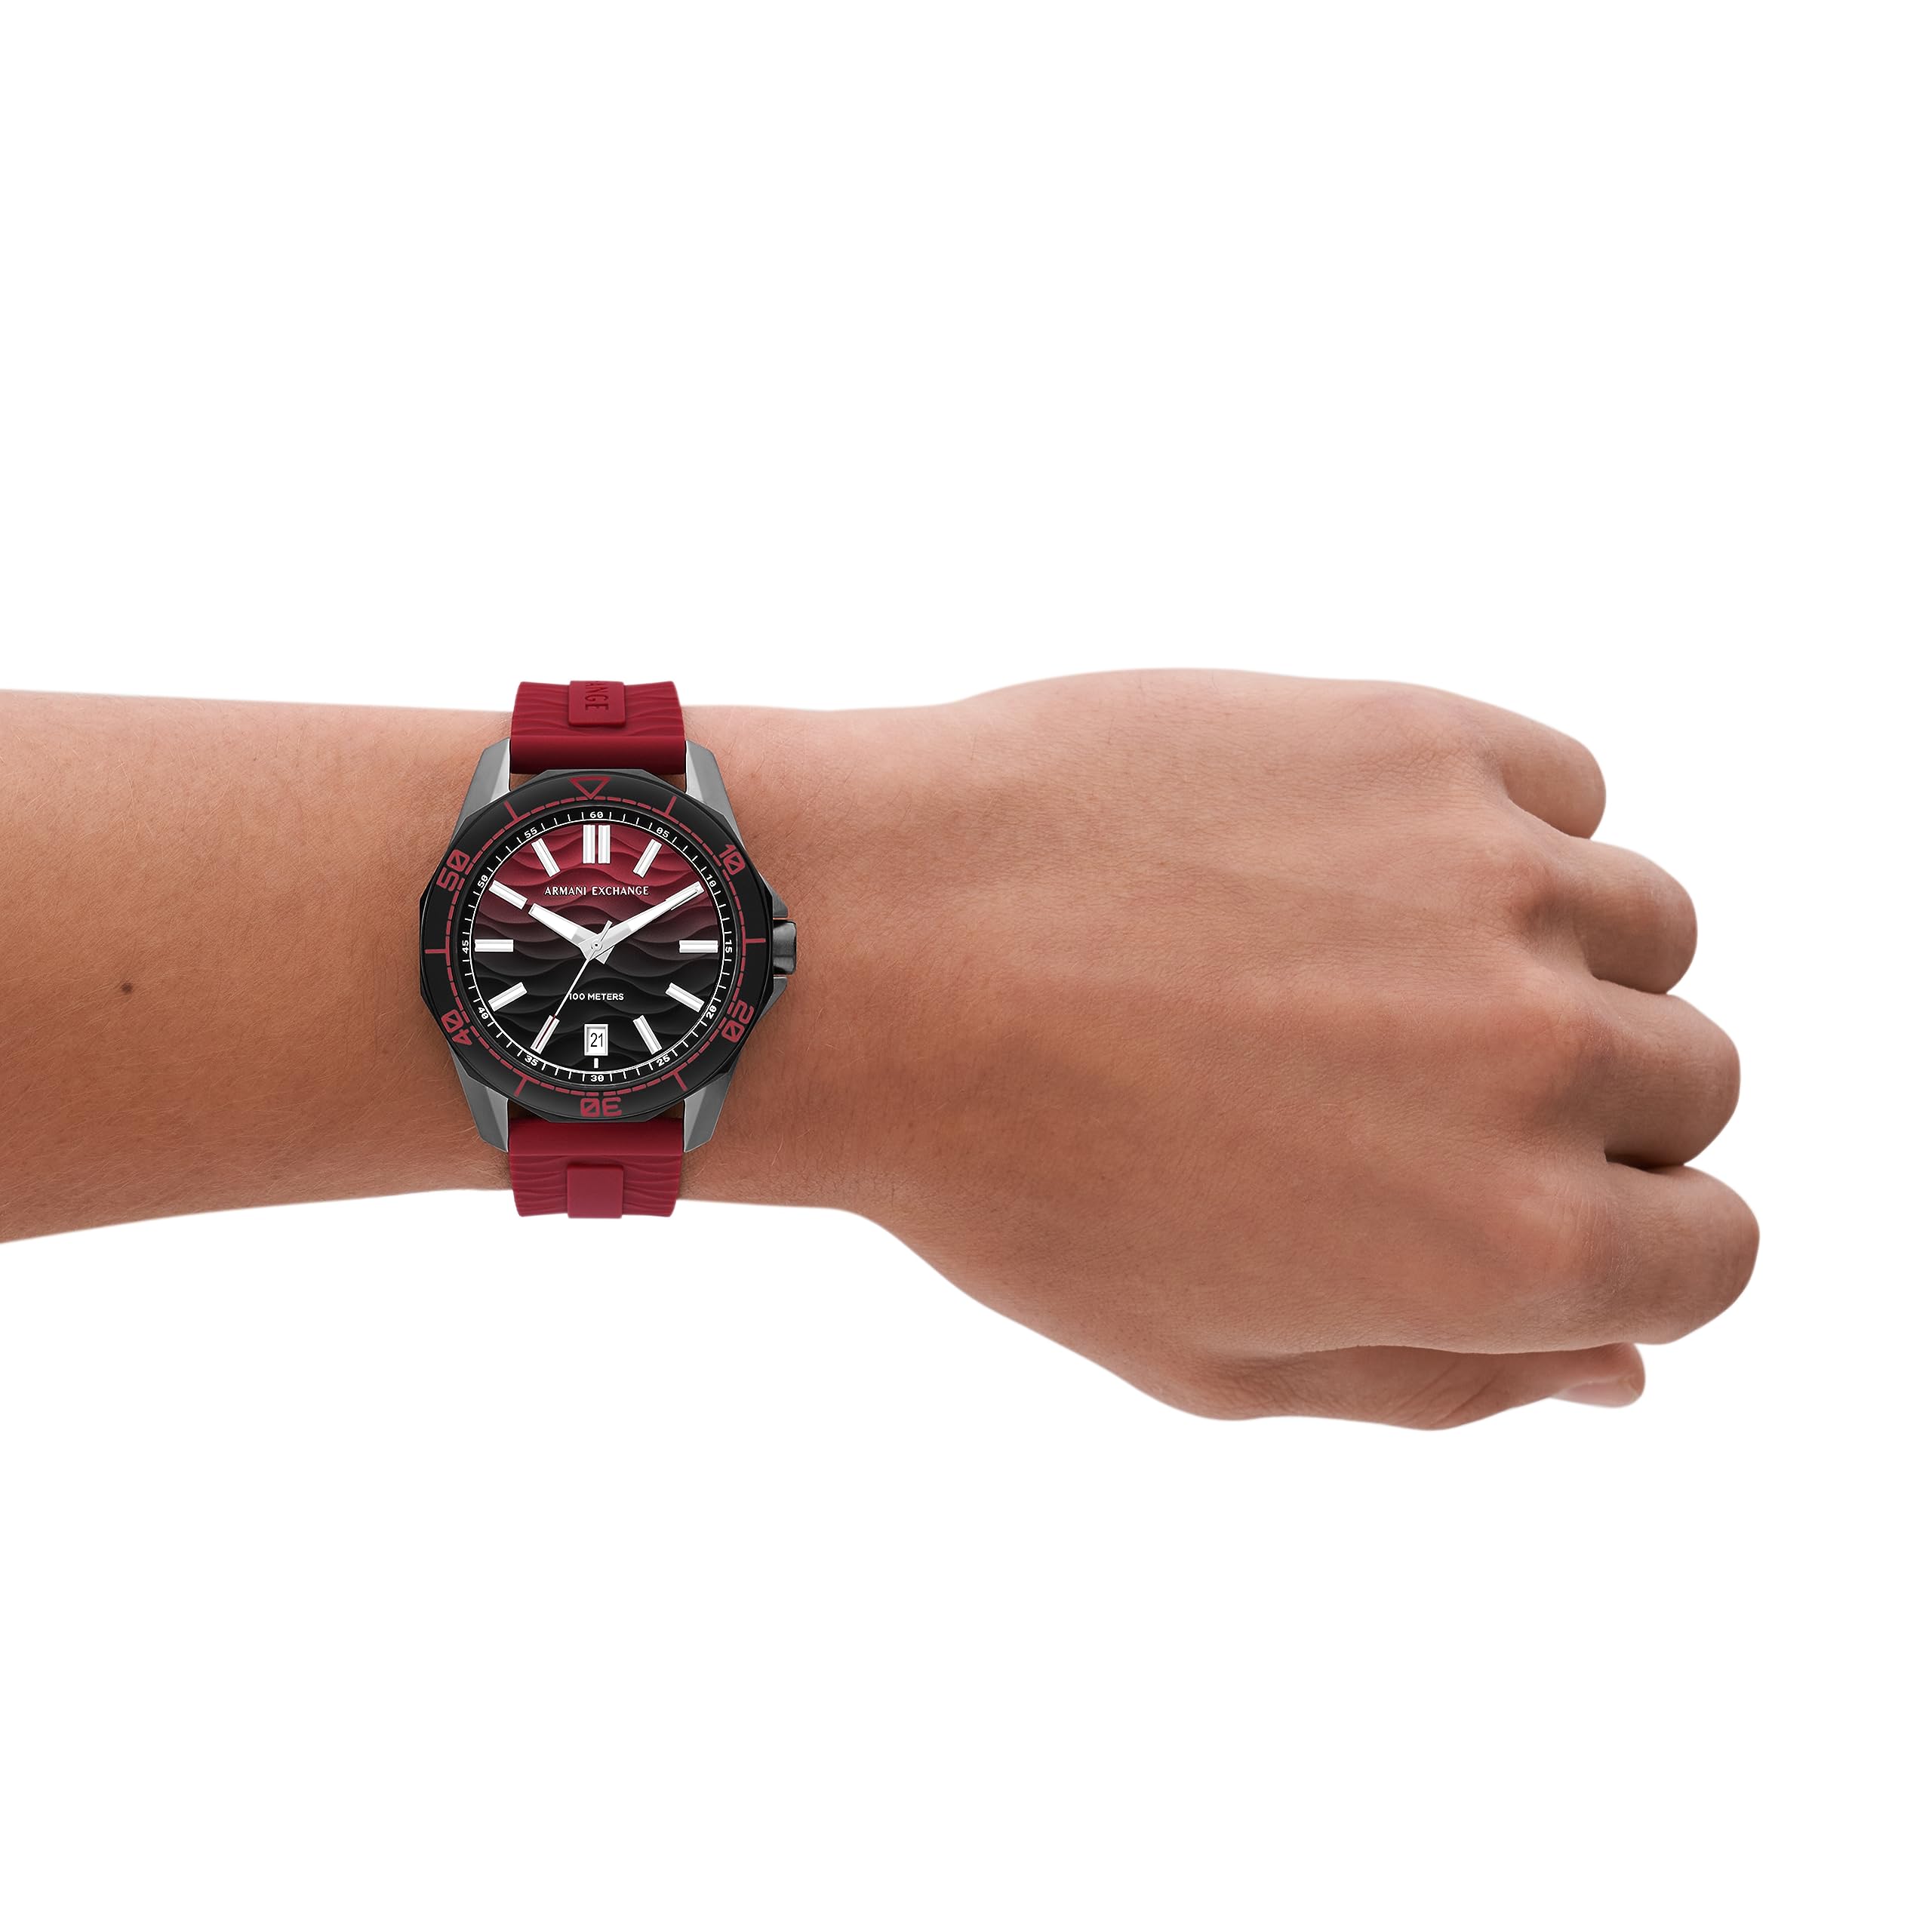 A|X ARMANI EXCHANGE Men's Three-Hand Date Red Silicone Band Watch (Model: AX1953)